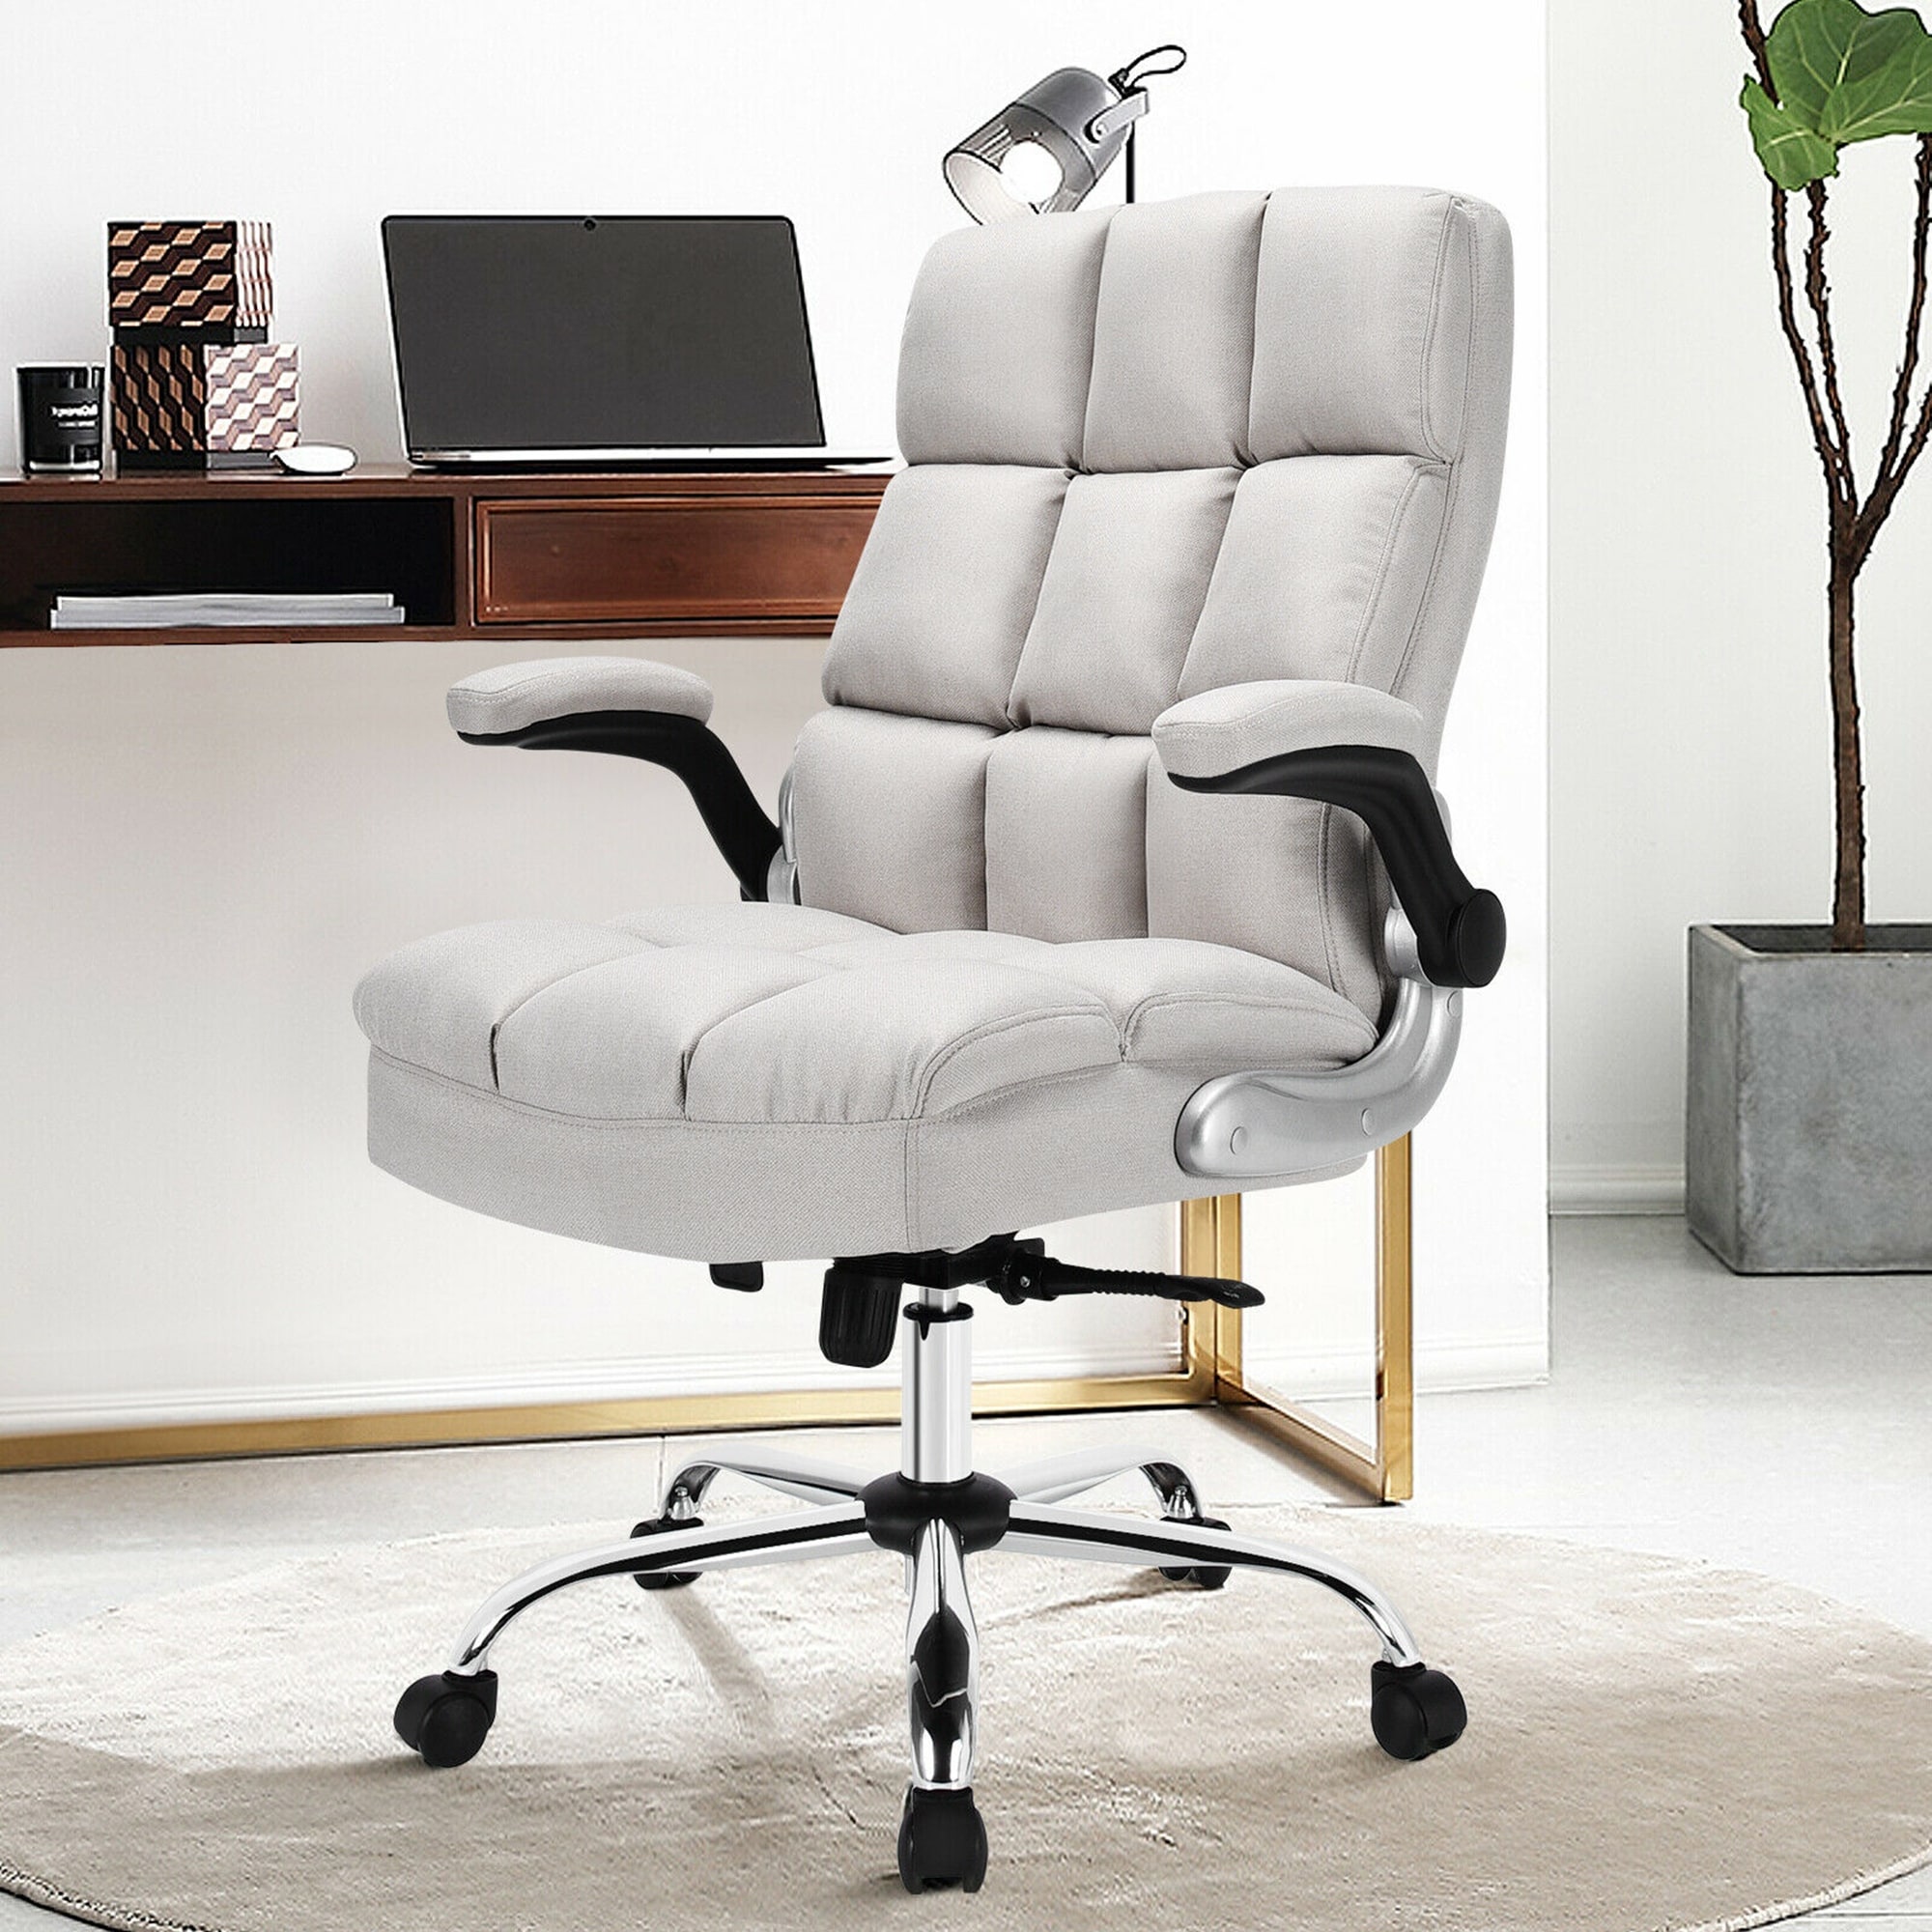 https://ak1.ostkcdn.com/images/products/is/images/direct/0d3fb9819bf03dd47dbba86f81201431493496f5/Gymax-High-Back-Big-%26-Tall-Office-Chair-Adjustable-Swivel-w-Flip-up.jpg